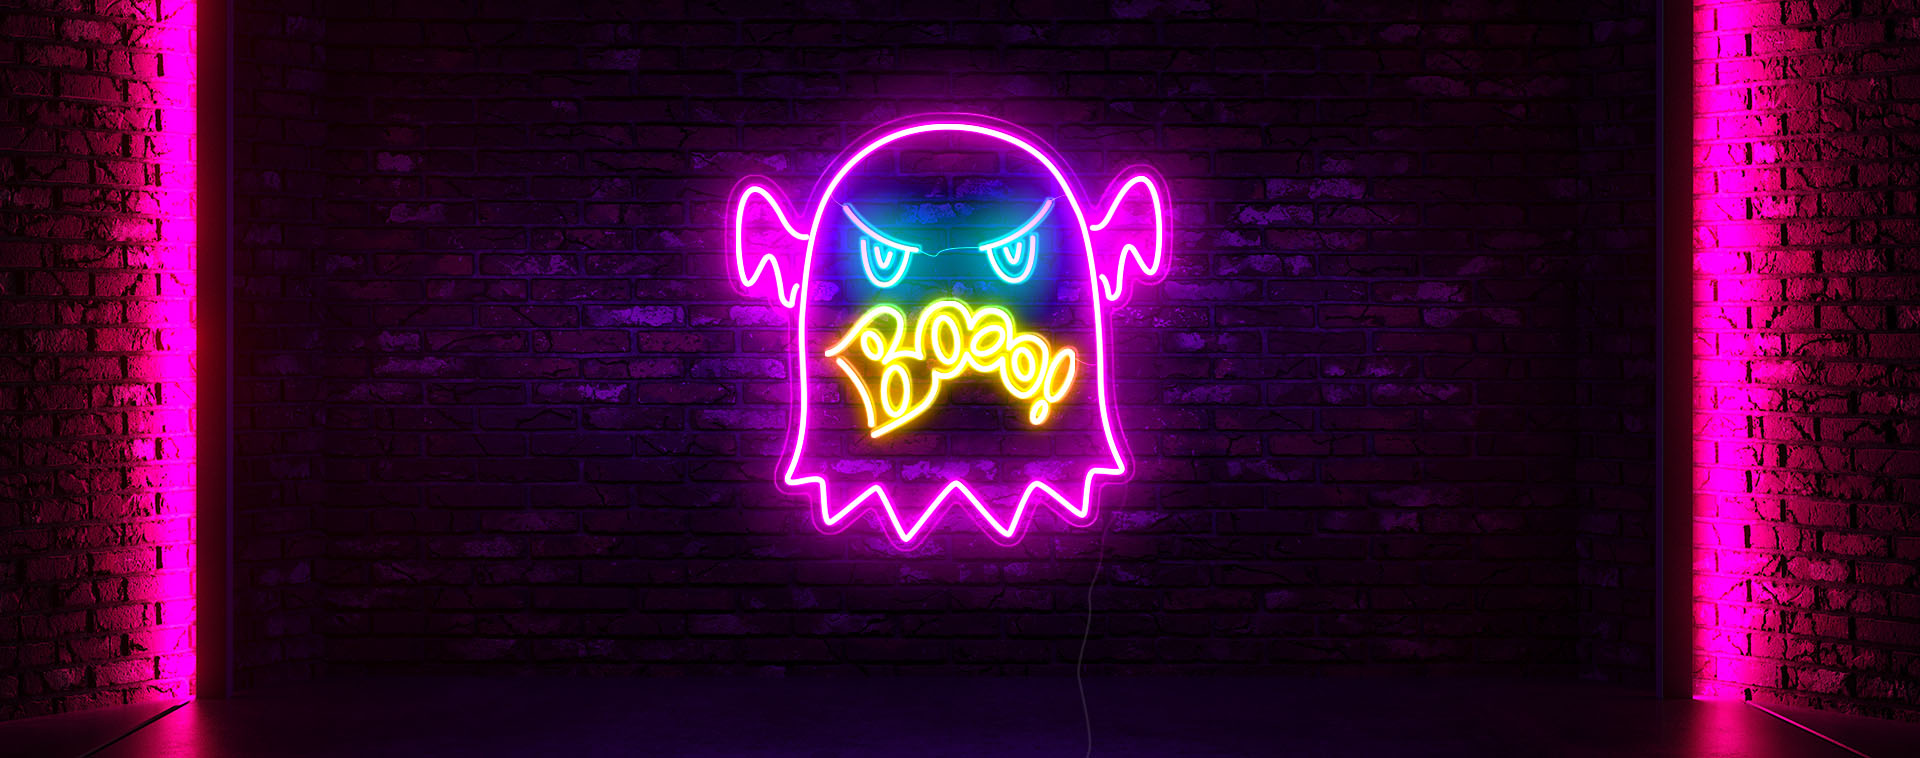 angry led neon light sign